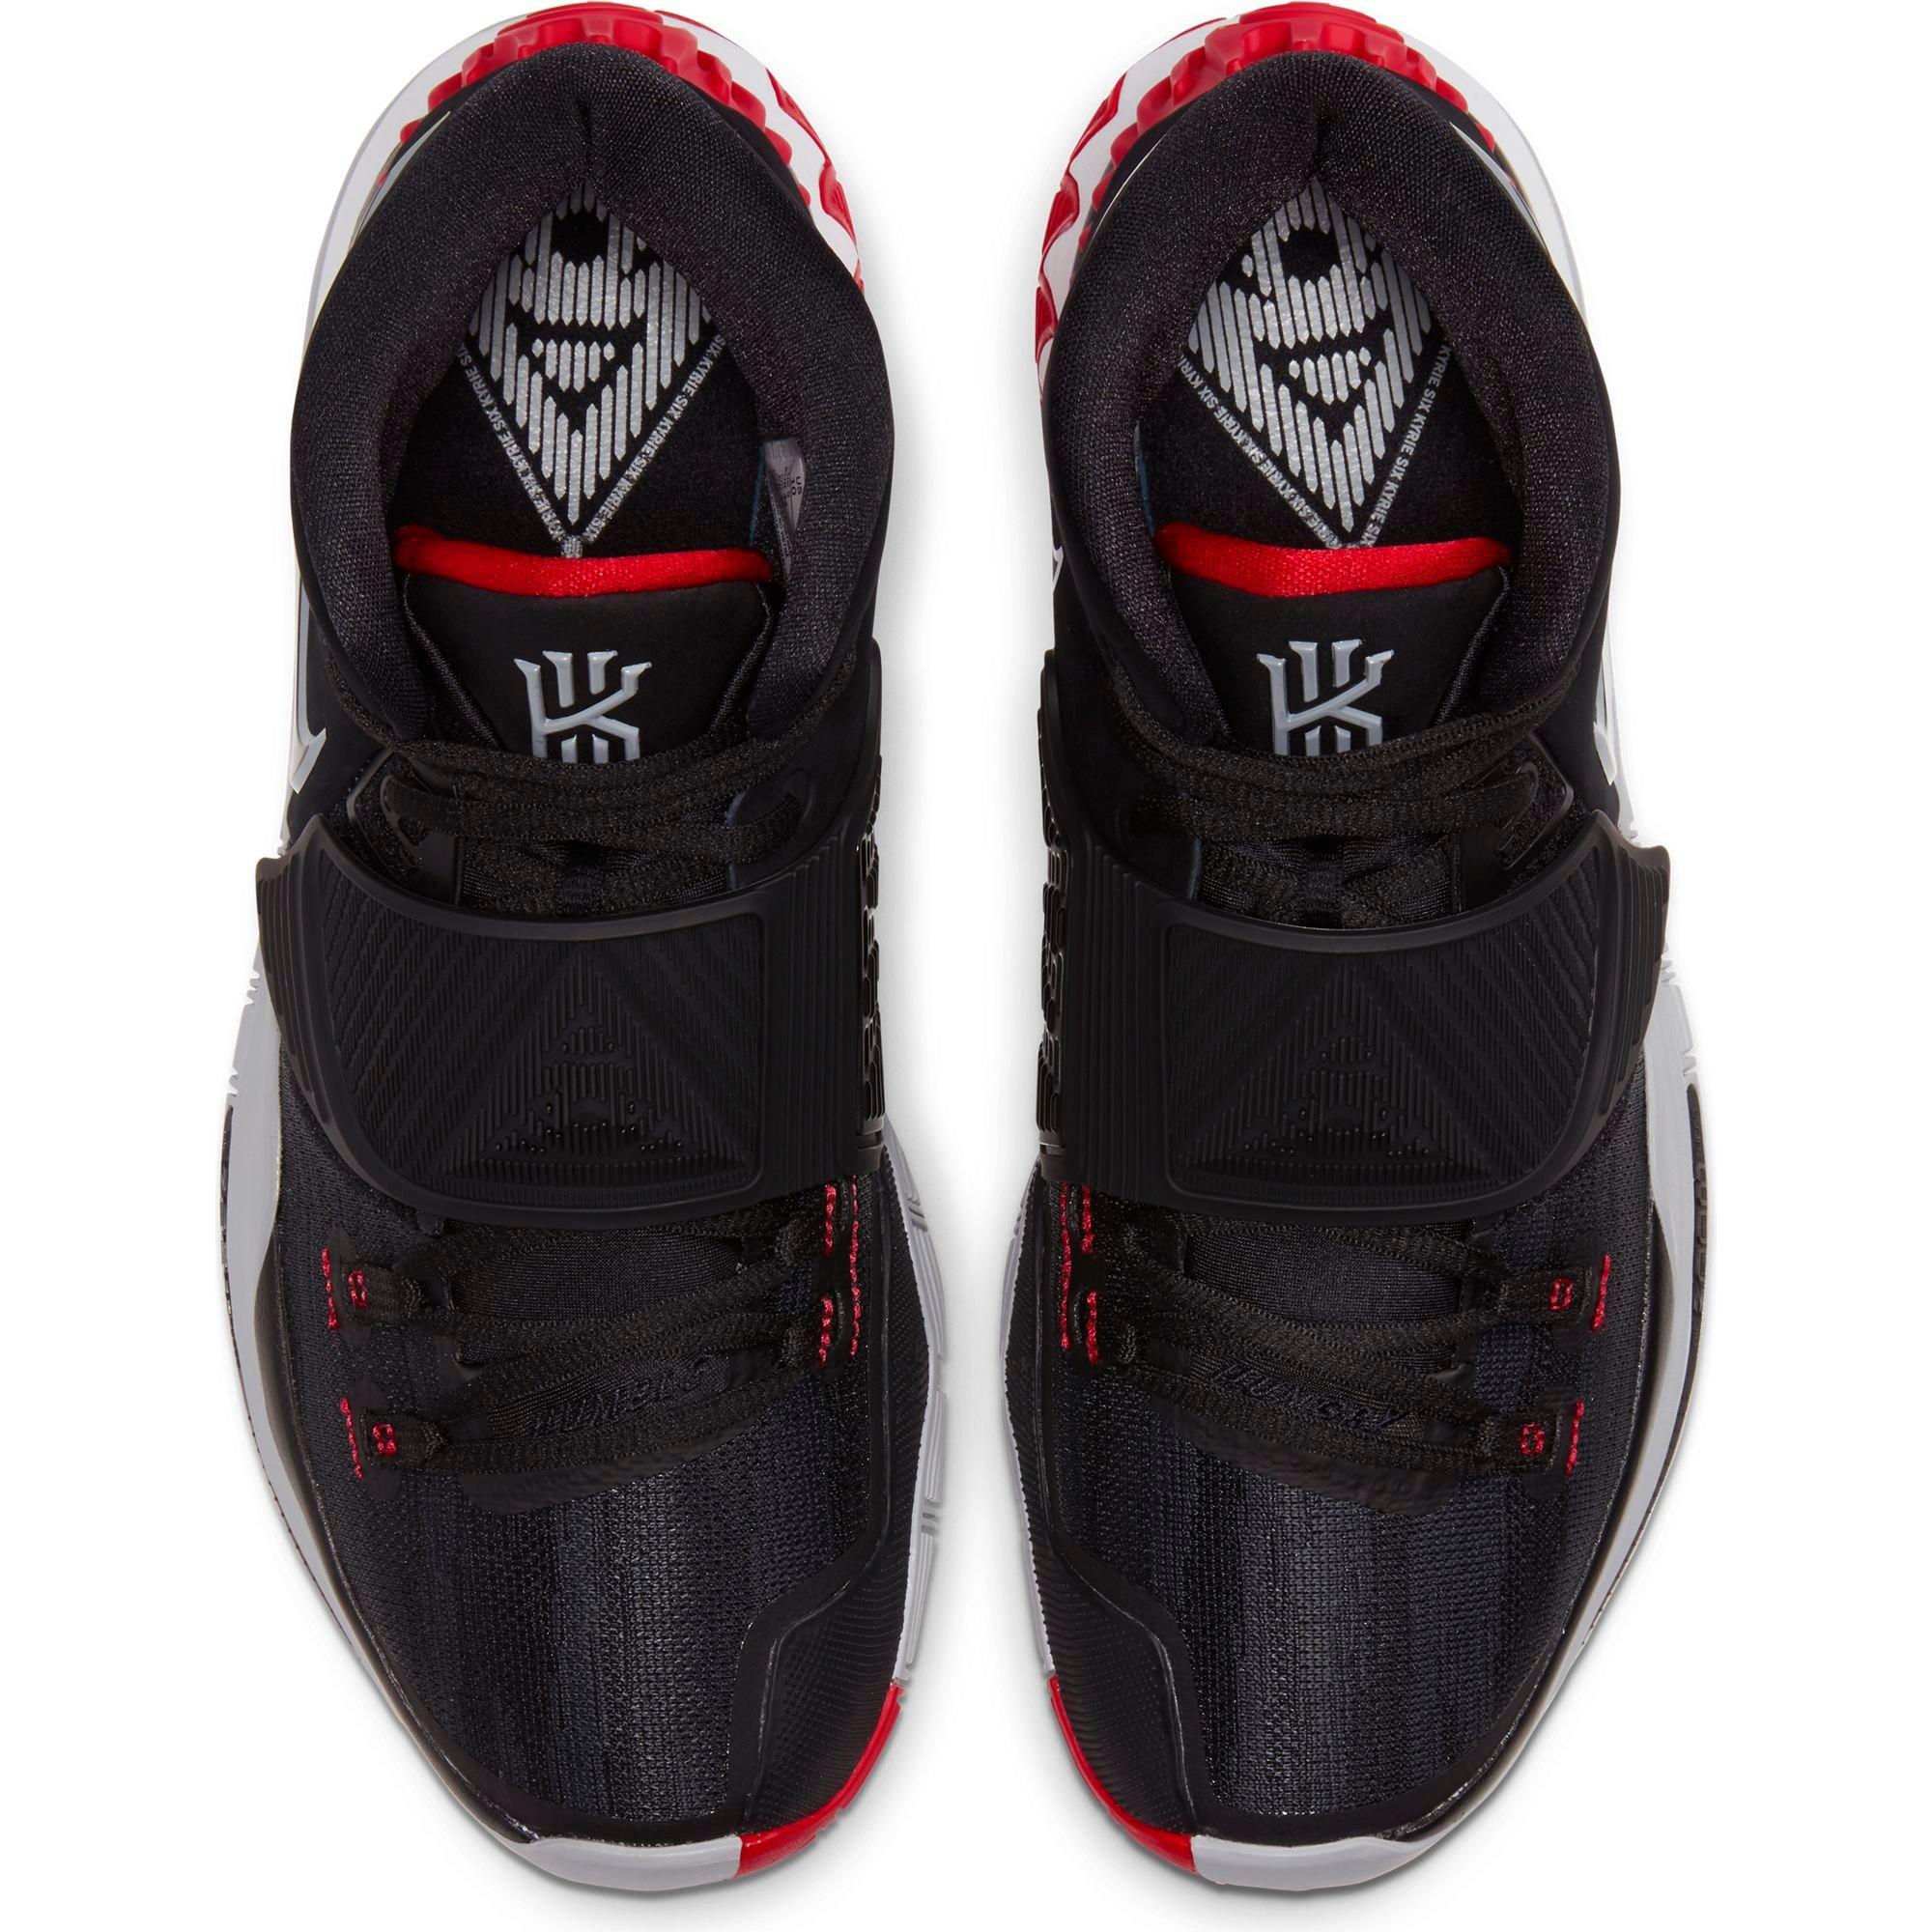 kyrie irving shoes black and red